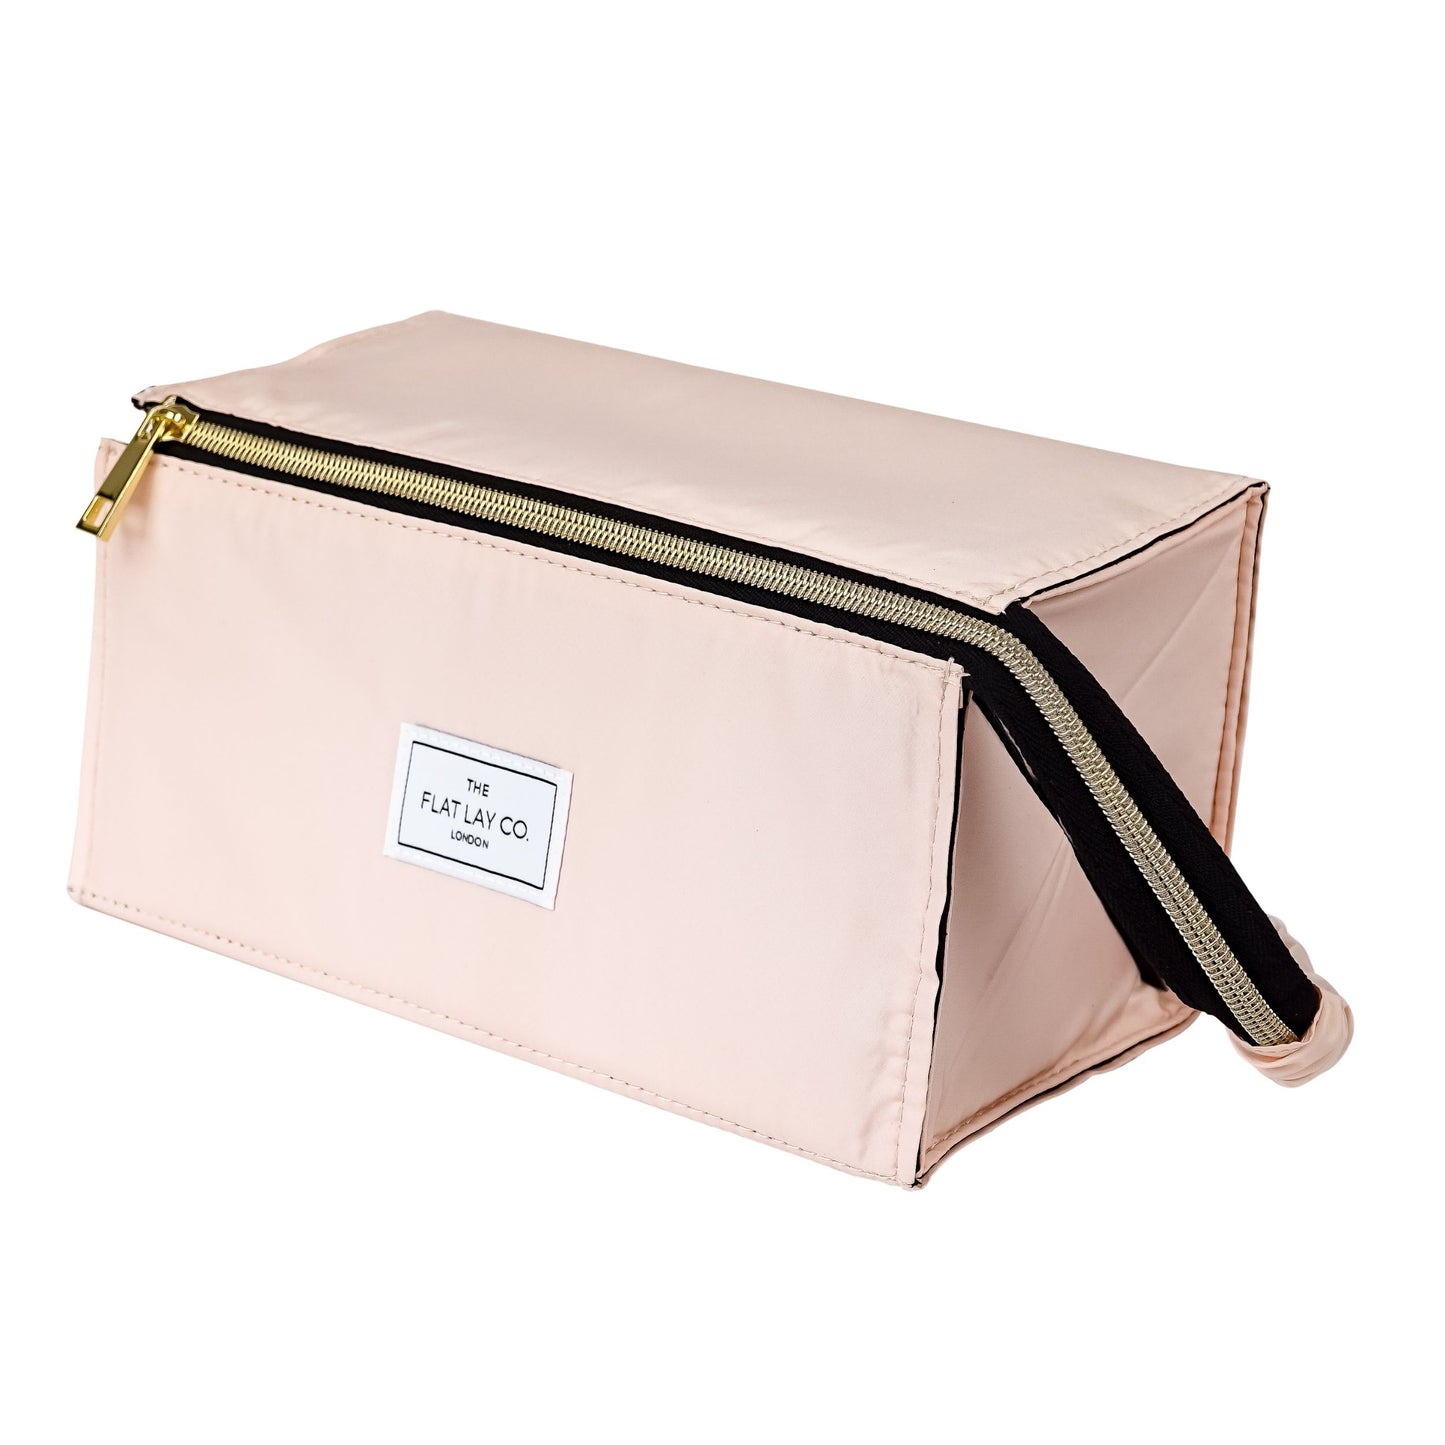 XXL Makeup Box Bag and Tray in Blush Pink